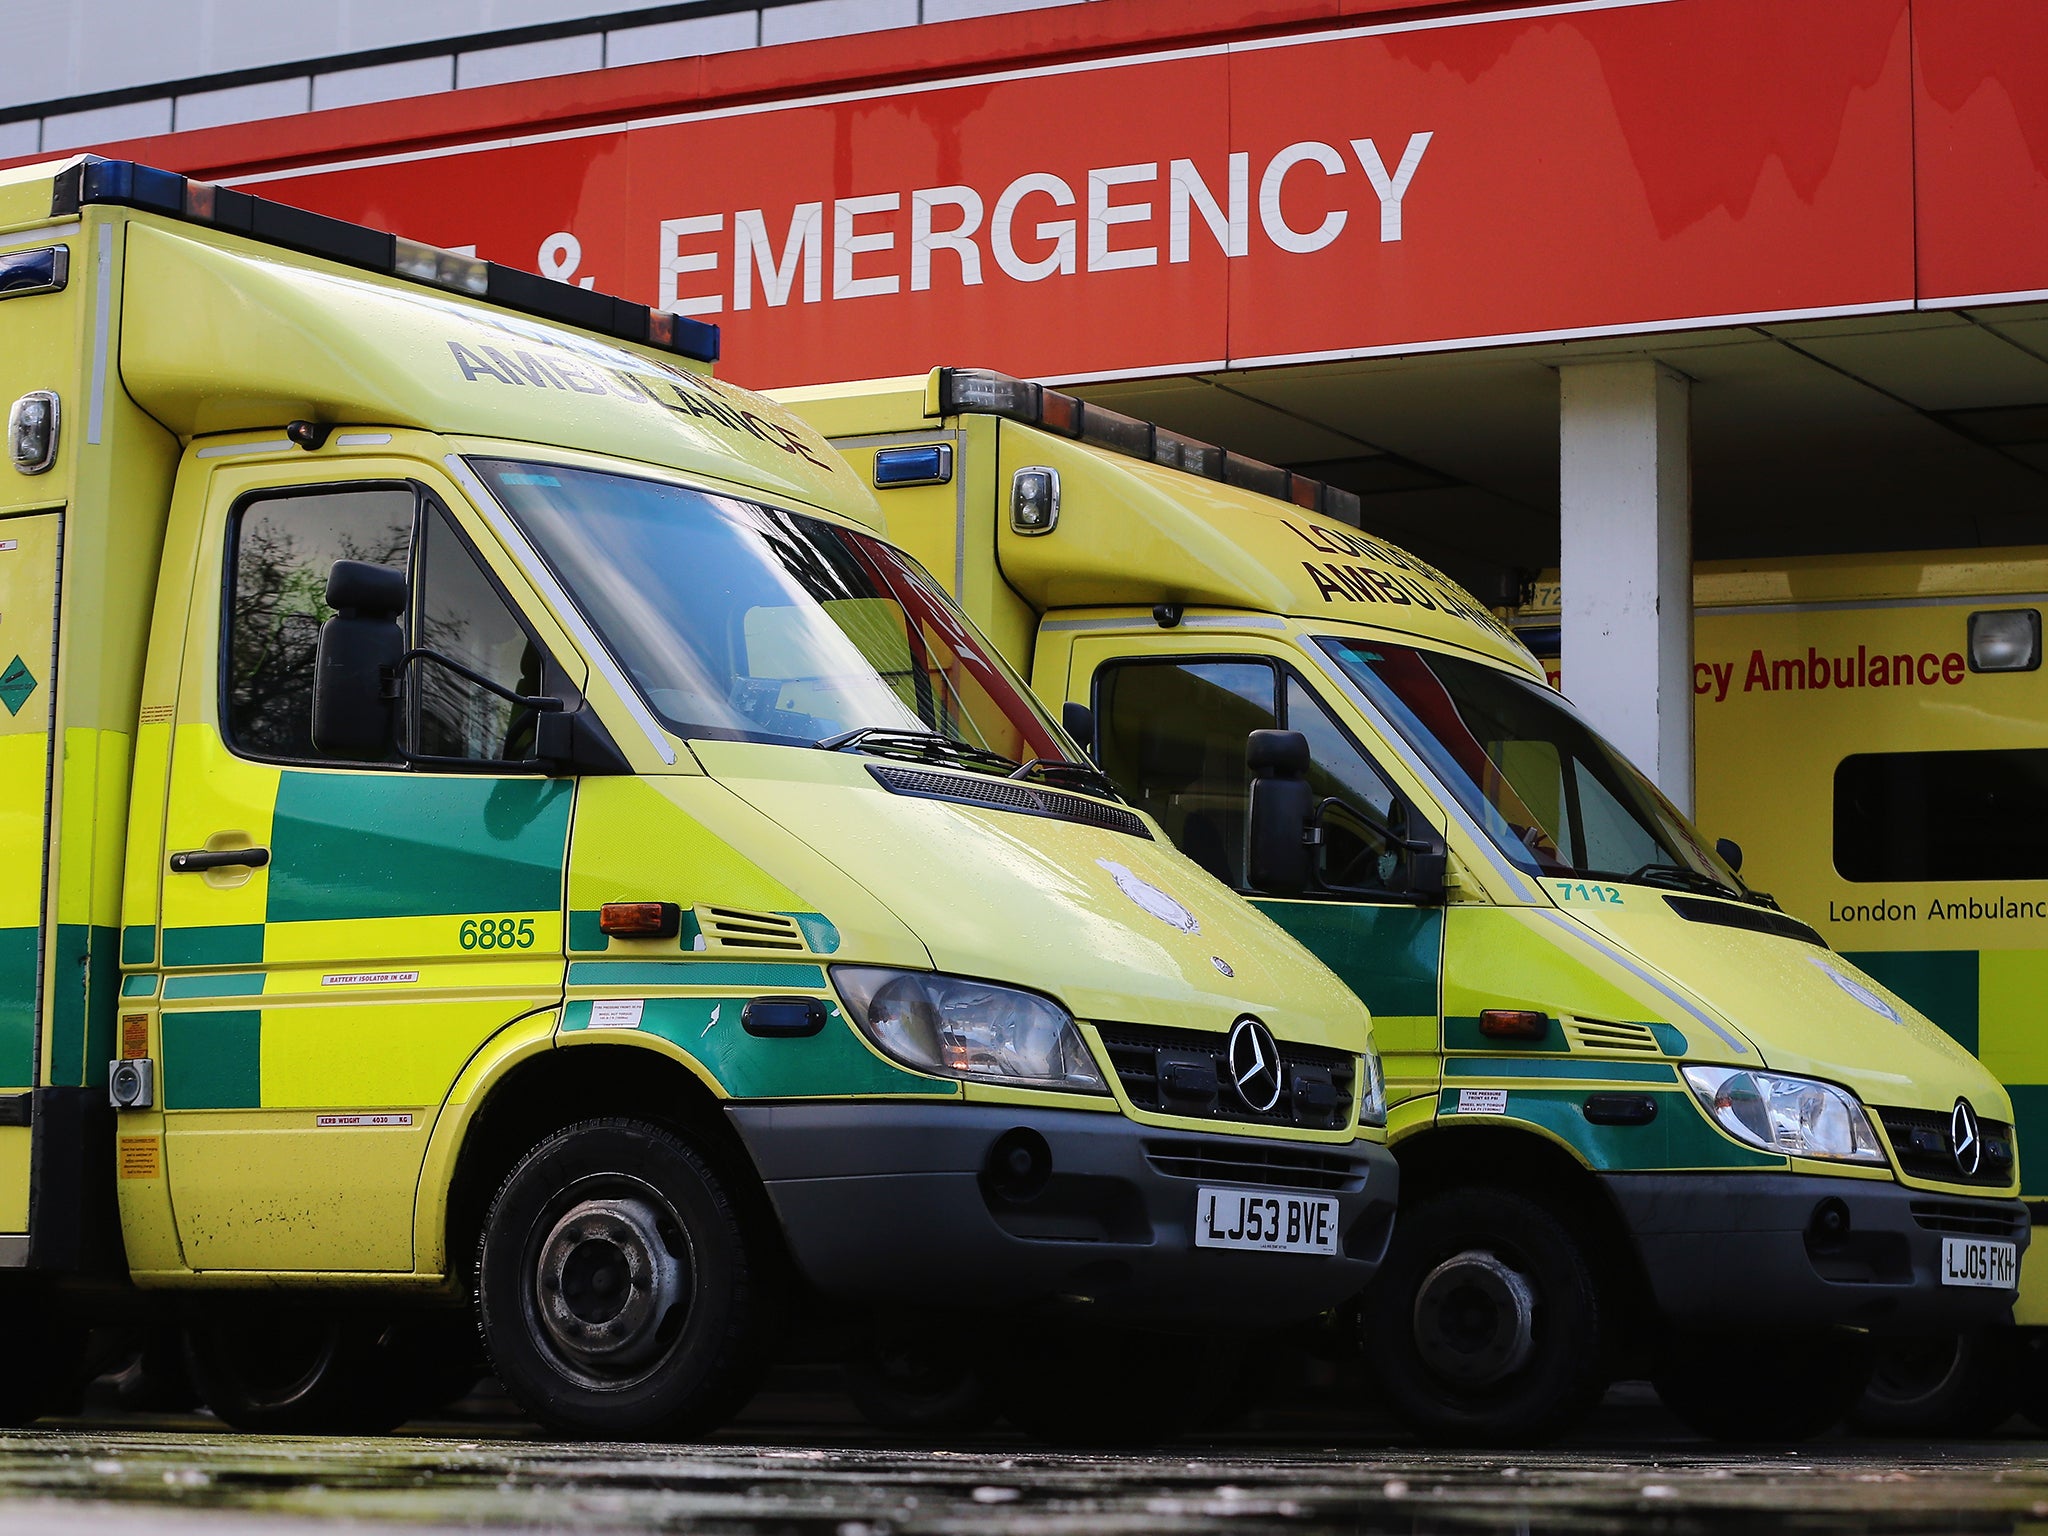 Only 79.8 per cent of patients were treated or admitted within four hours at major emergency departments